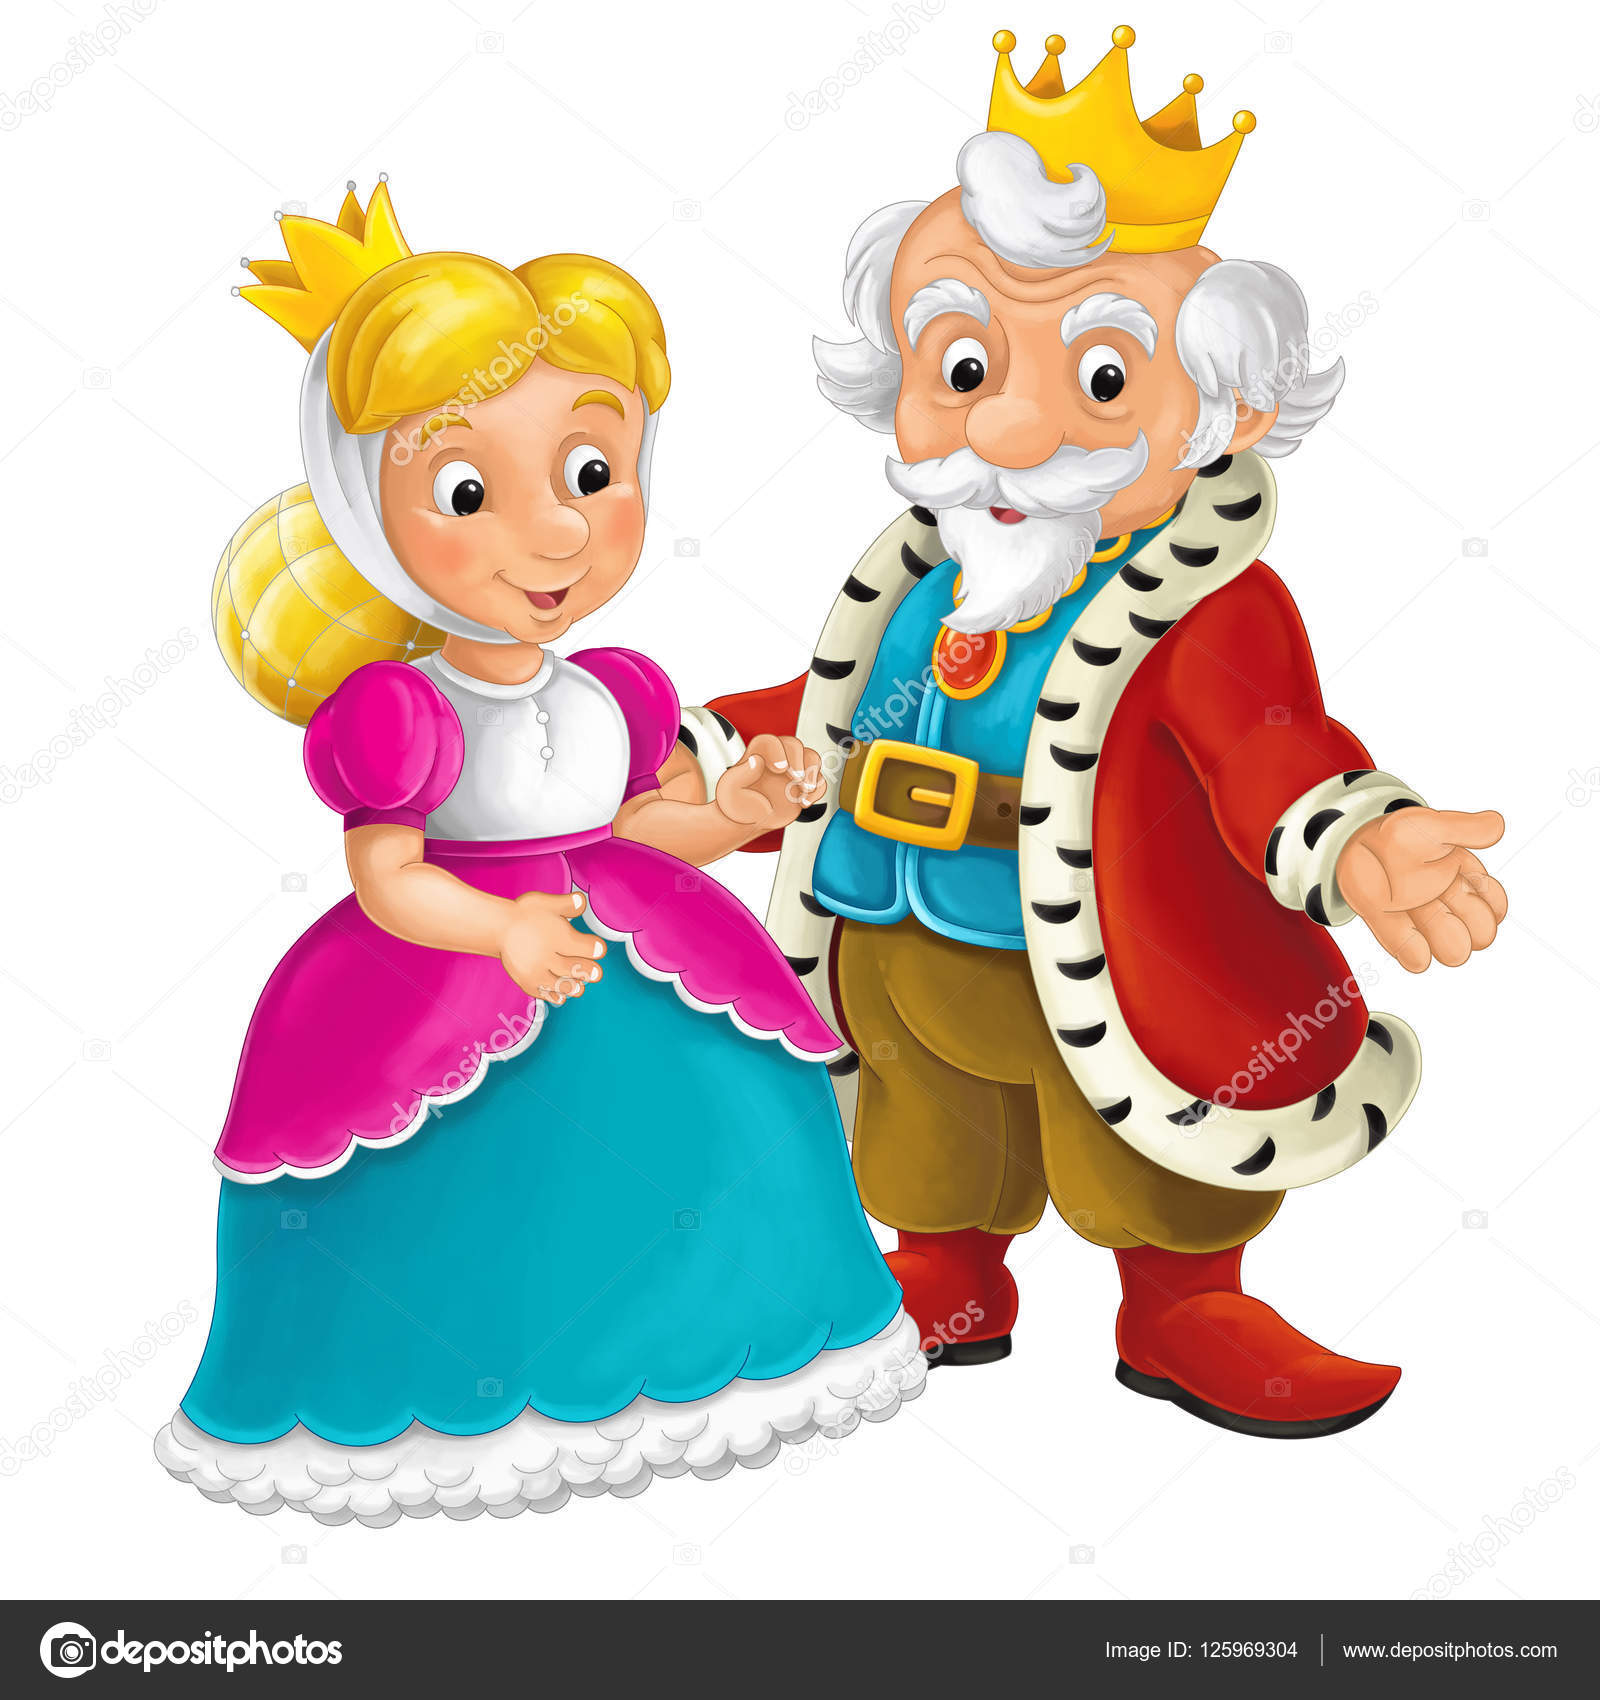 Cartoon isolated scene with king and queen - illustration for children  Stock Photo by ©agaes8080 125969304